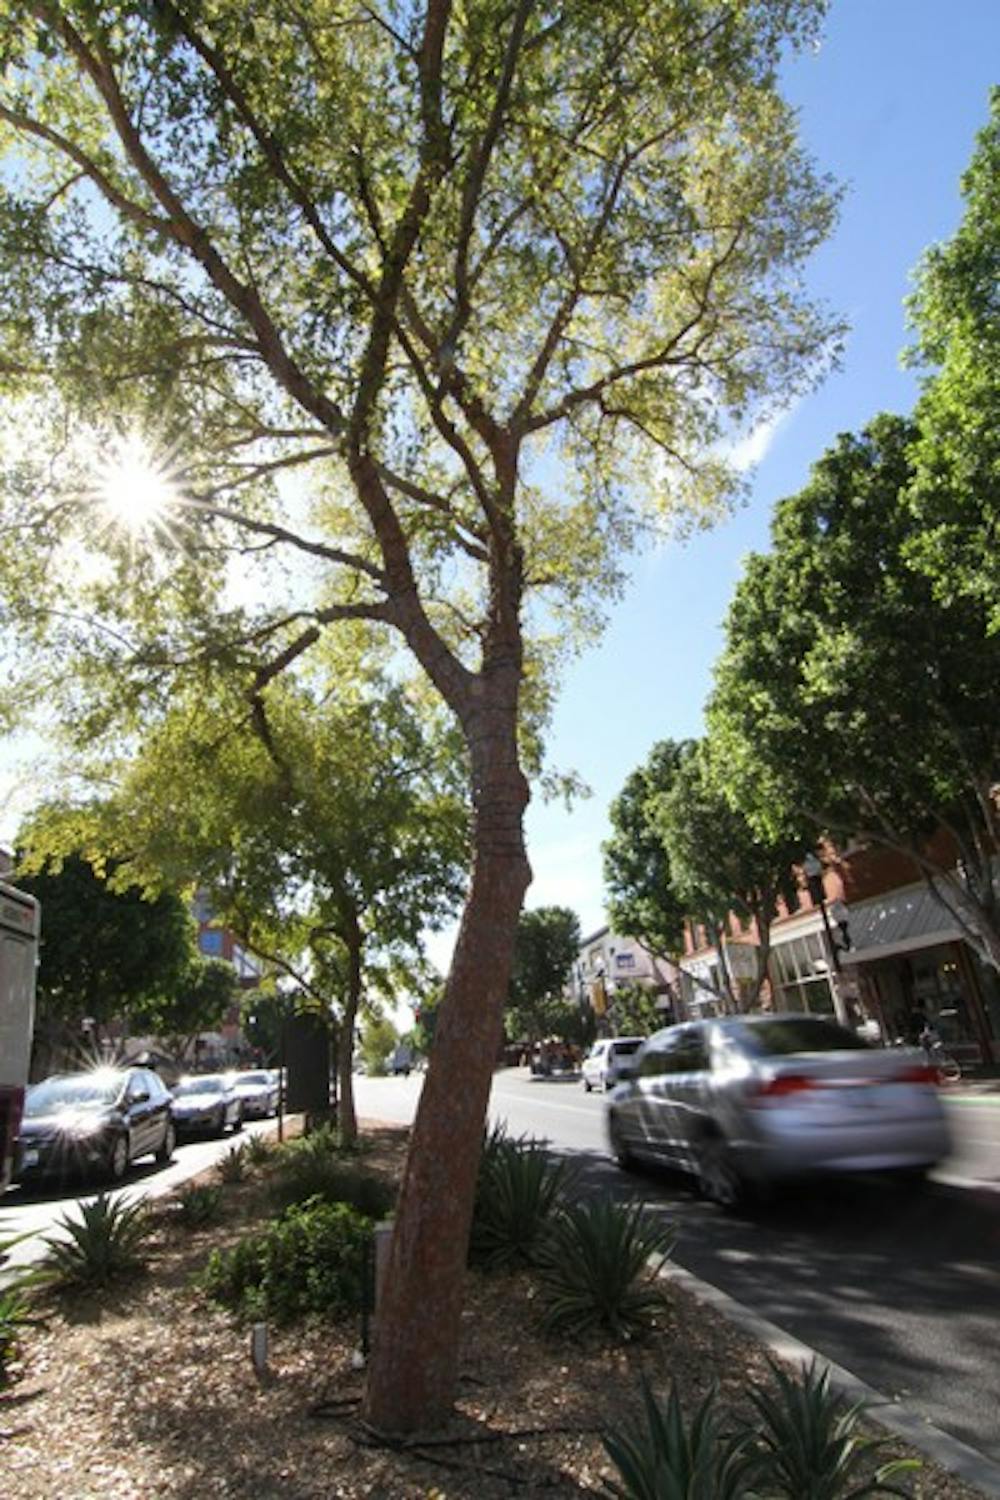 MILL ROOTS: Cars drive past a tree on Mill Avenue Thursday afternoon. Tempe City Council members have decided to use ficus trees exclusively on Mill Avenue. (Photo by Lisa Bartoli)